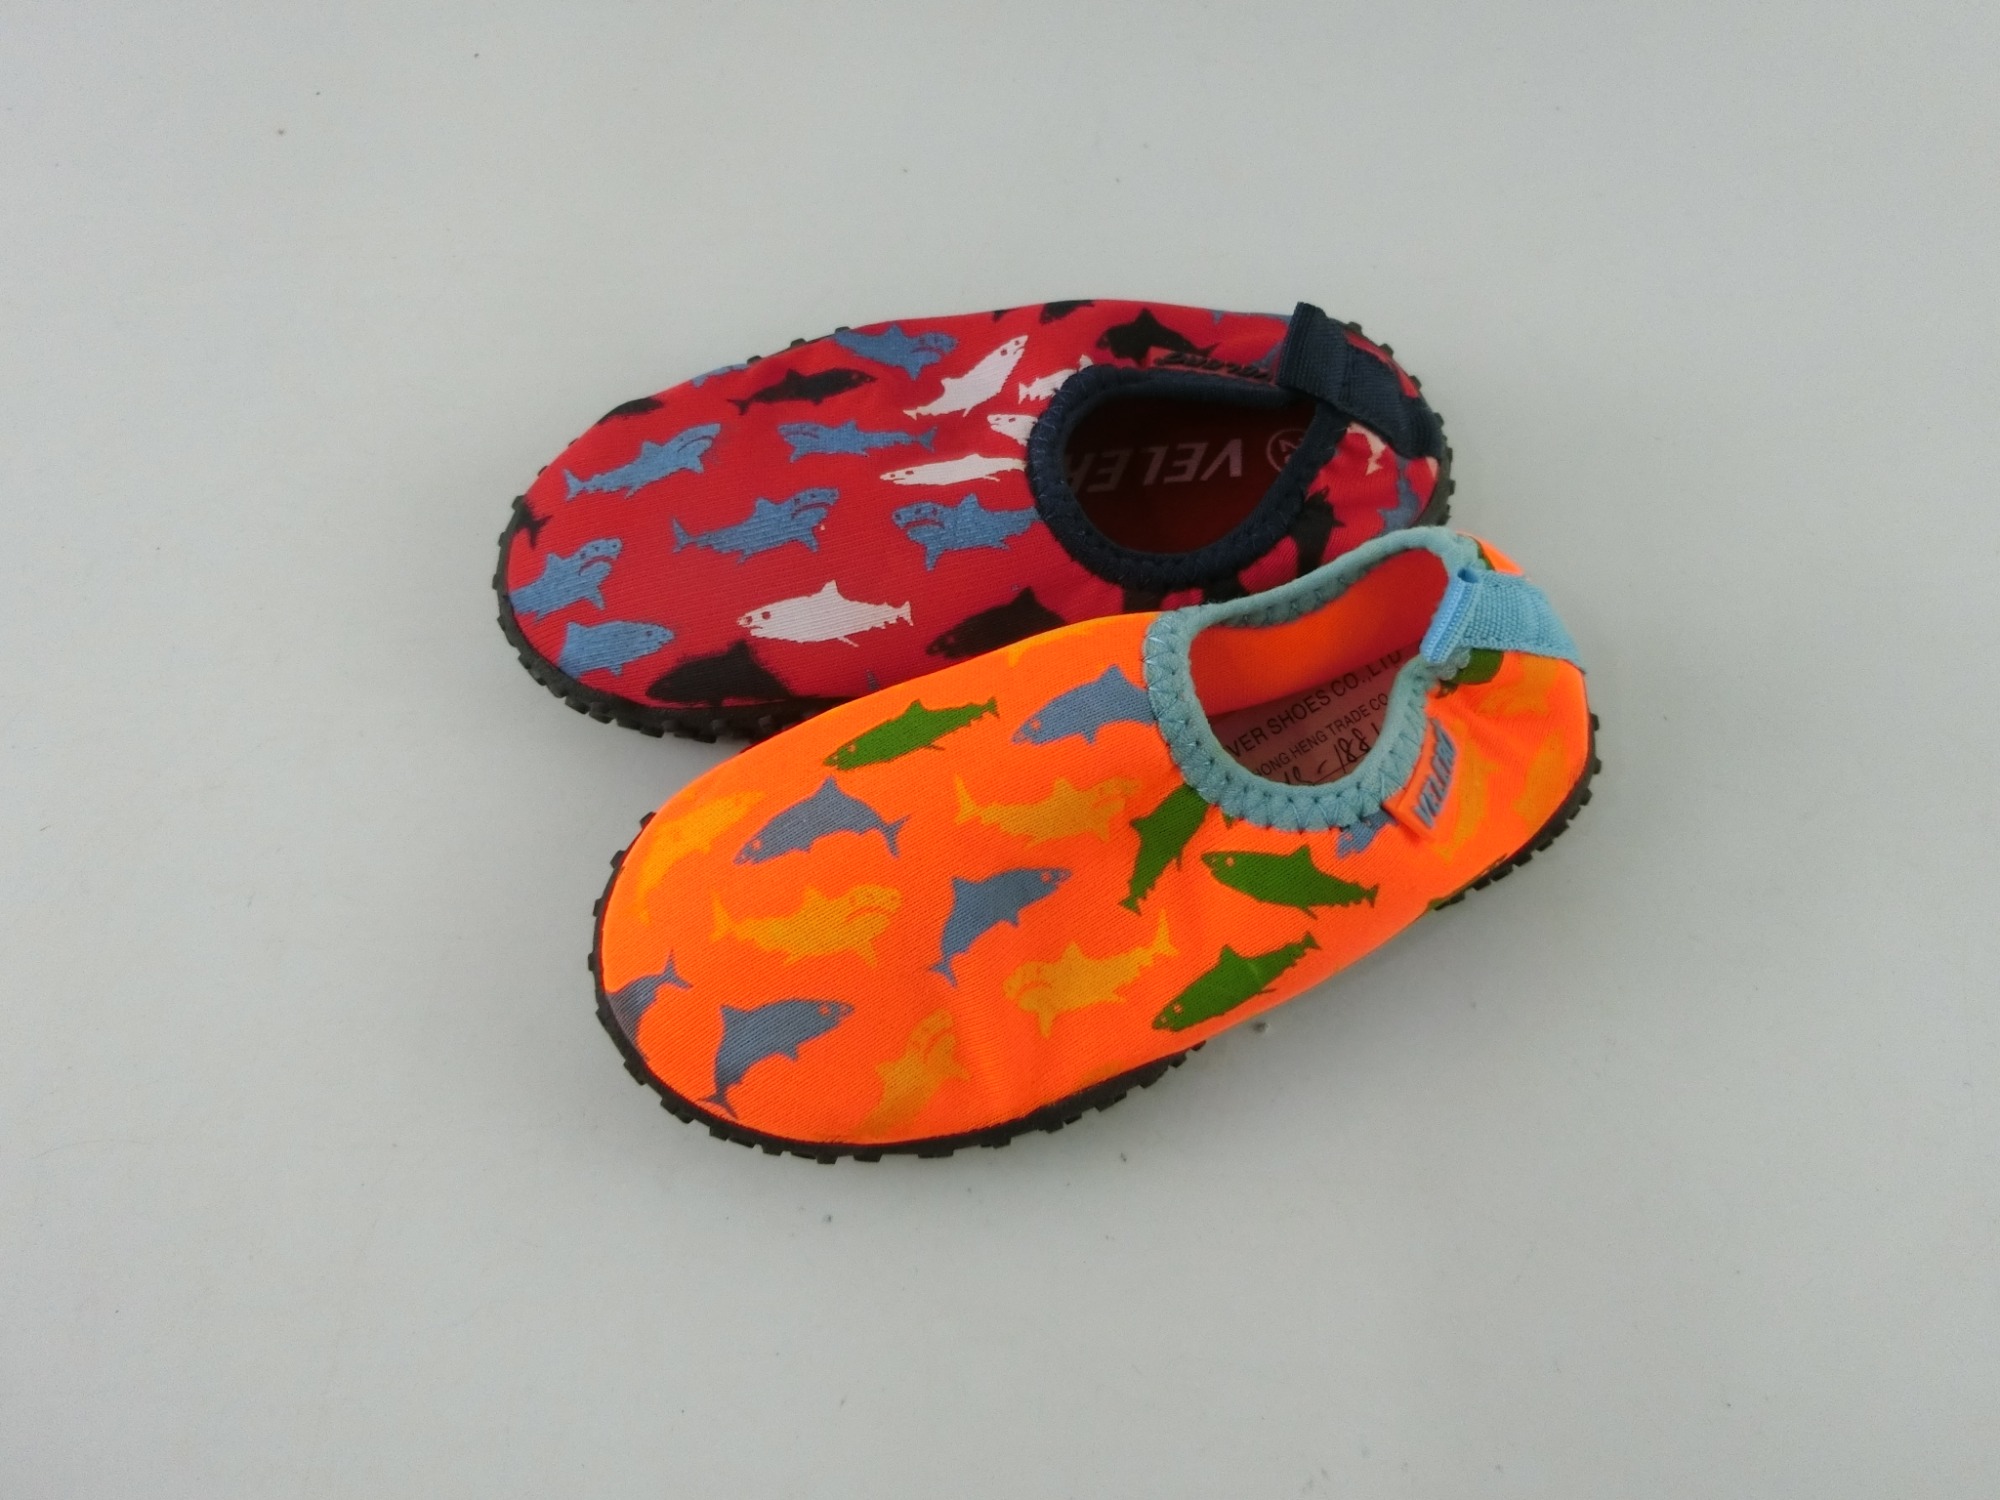 Designed kids water shoes